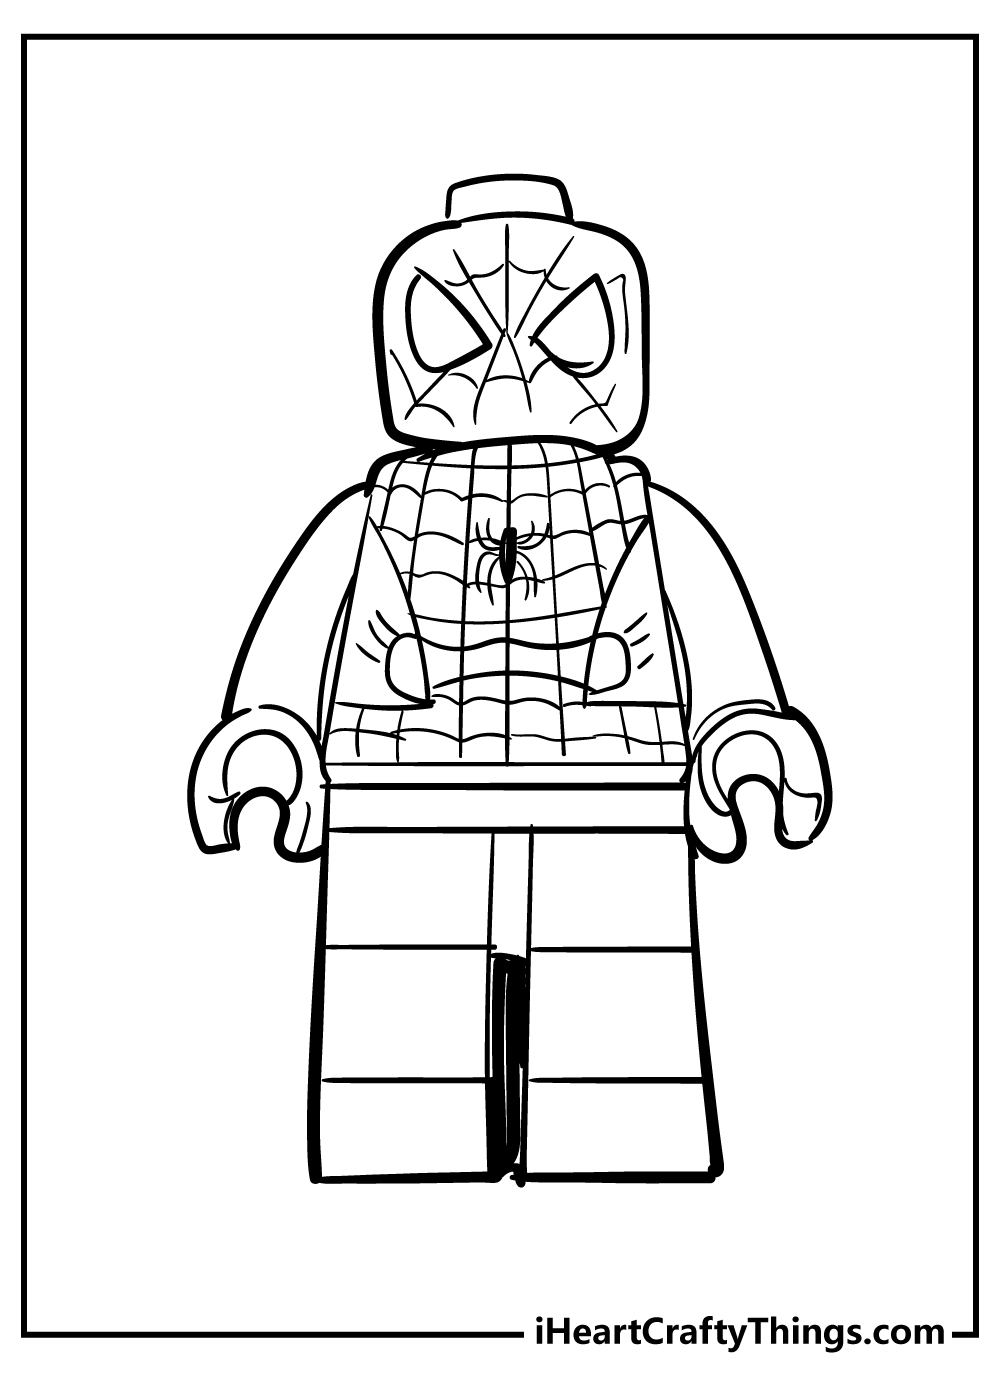 Lego Avengers Coloring Pages for adults free printable